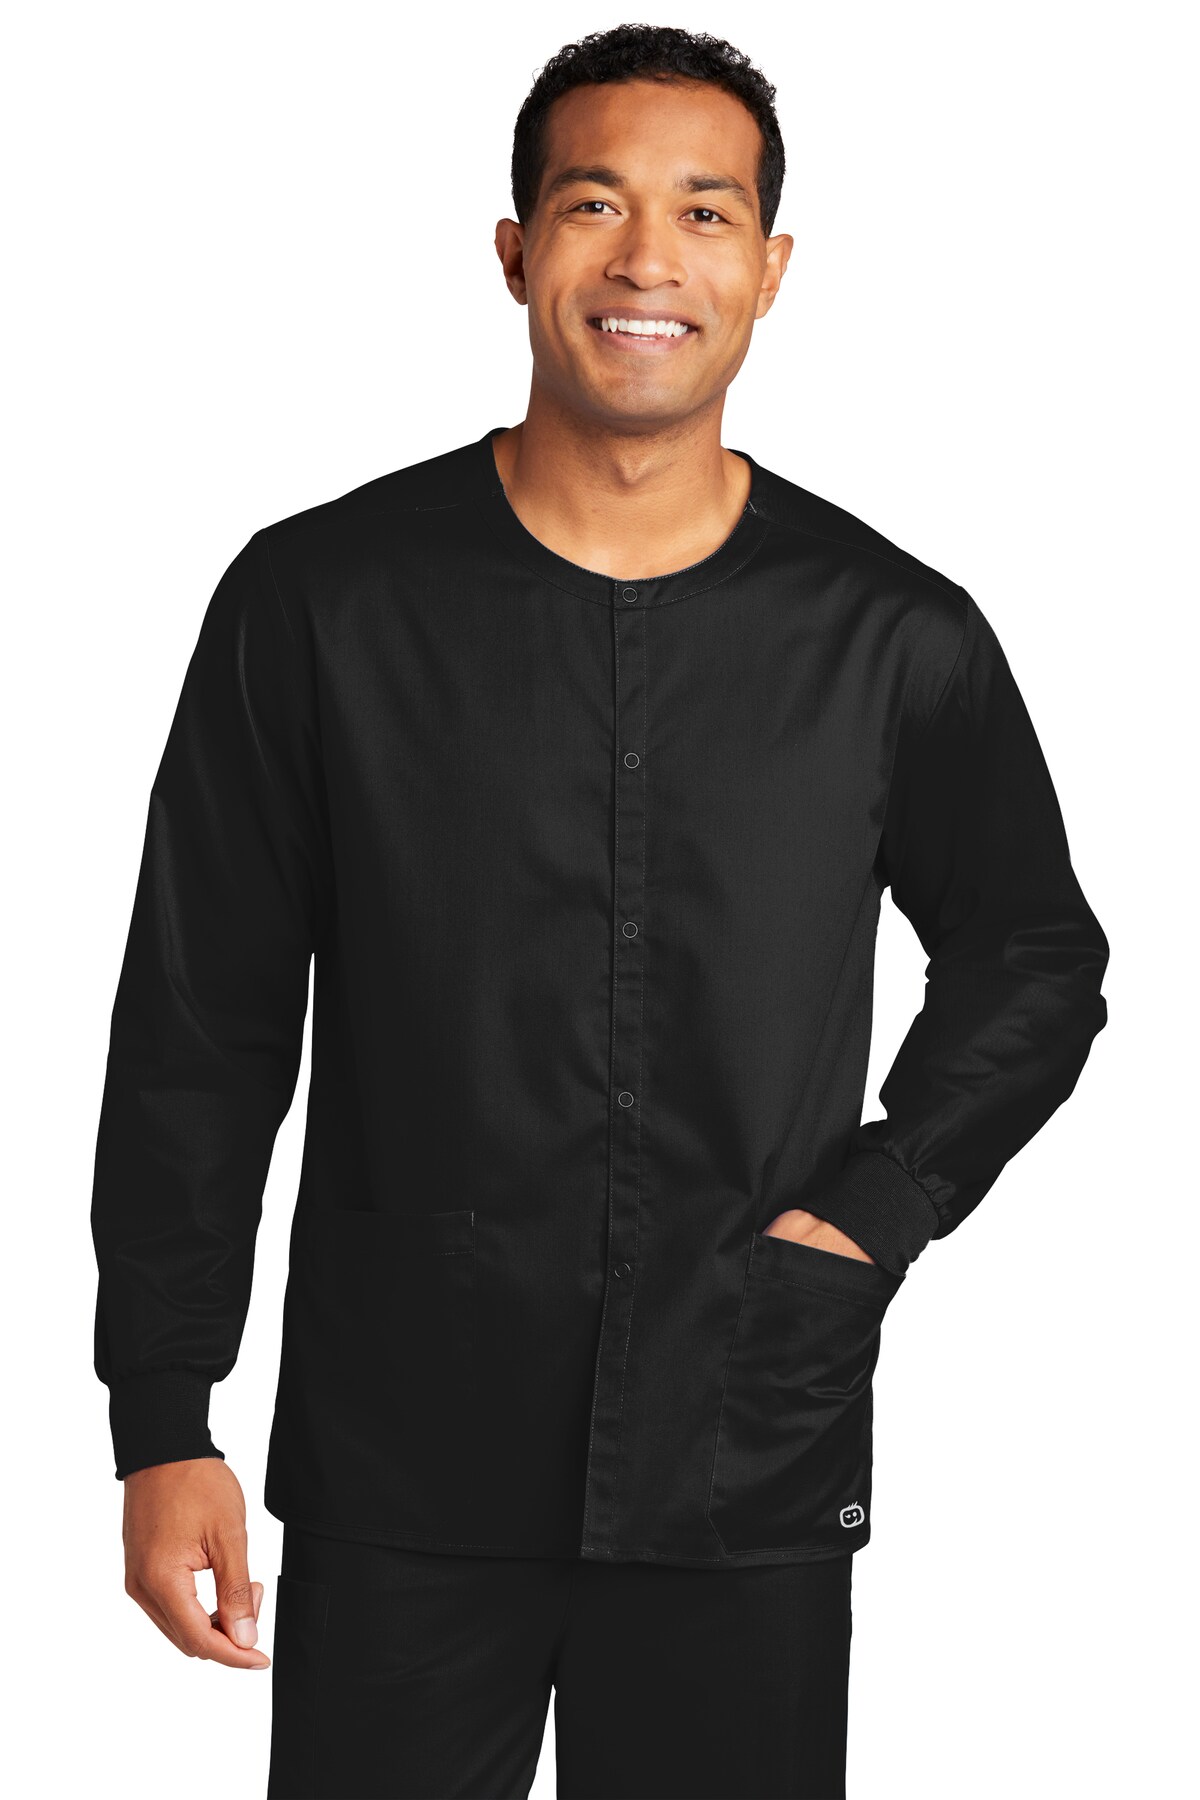 Jackets and Lab Coats for Ultimate Comfort and Style-with our stylish scrub apparel and clinical uniforms | Redefine nursing scrubs and embrace lab coat fashion for a blend of comfort and trendsetting elegance | RADYAN&#xAE;